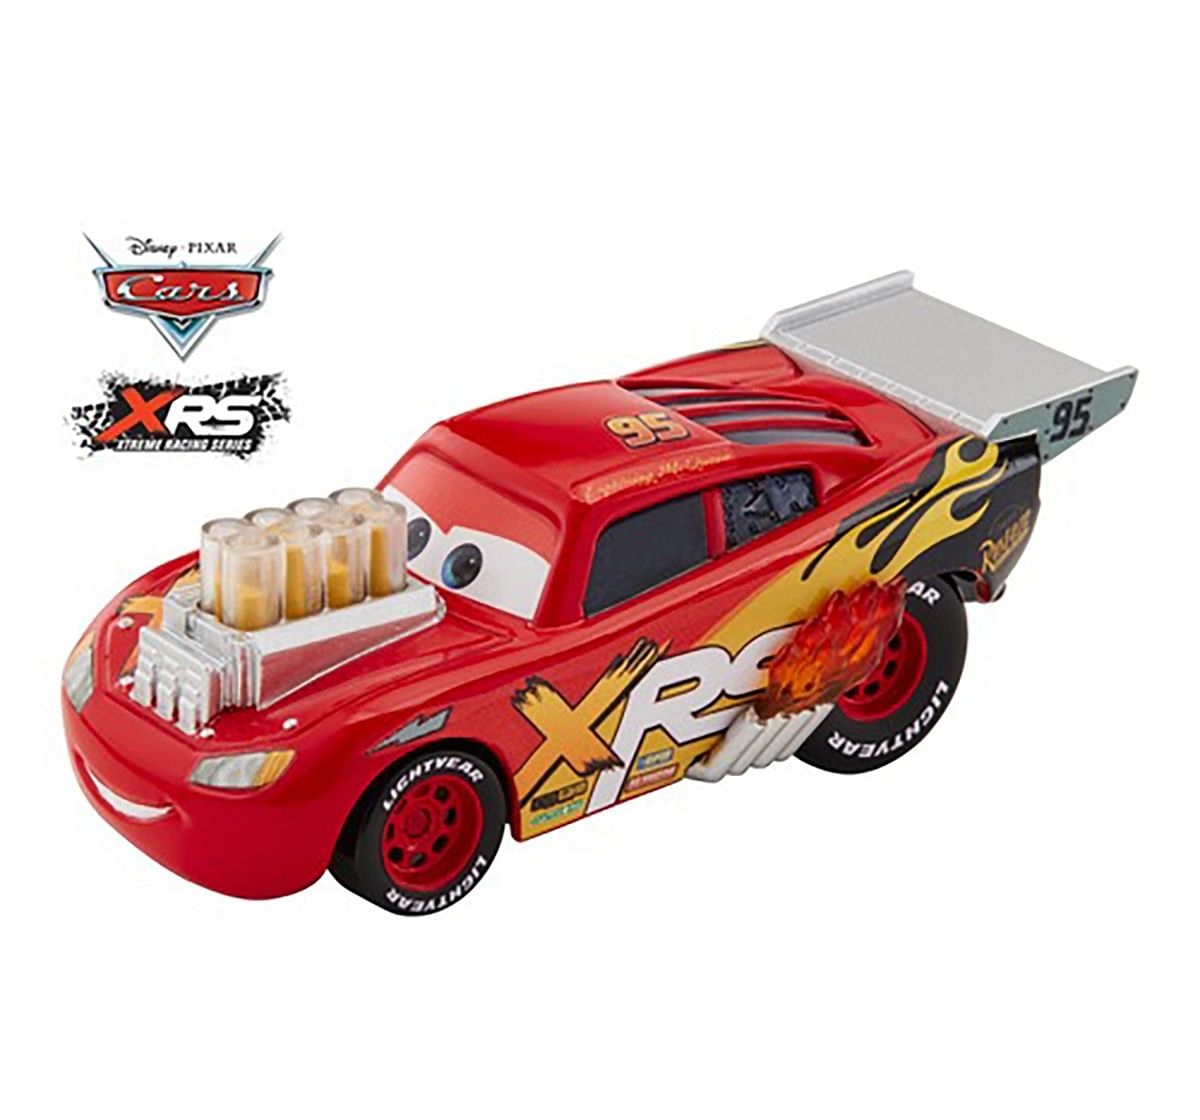 Hotwheels Cars Xrs 1:55  Vehicles for Kids age 3Y+, Assorted